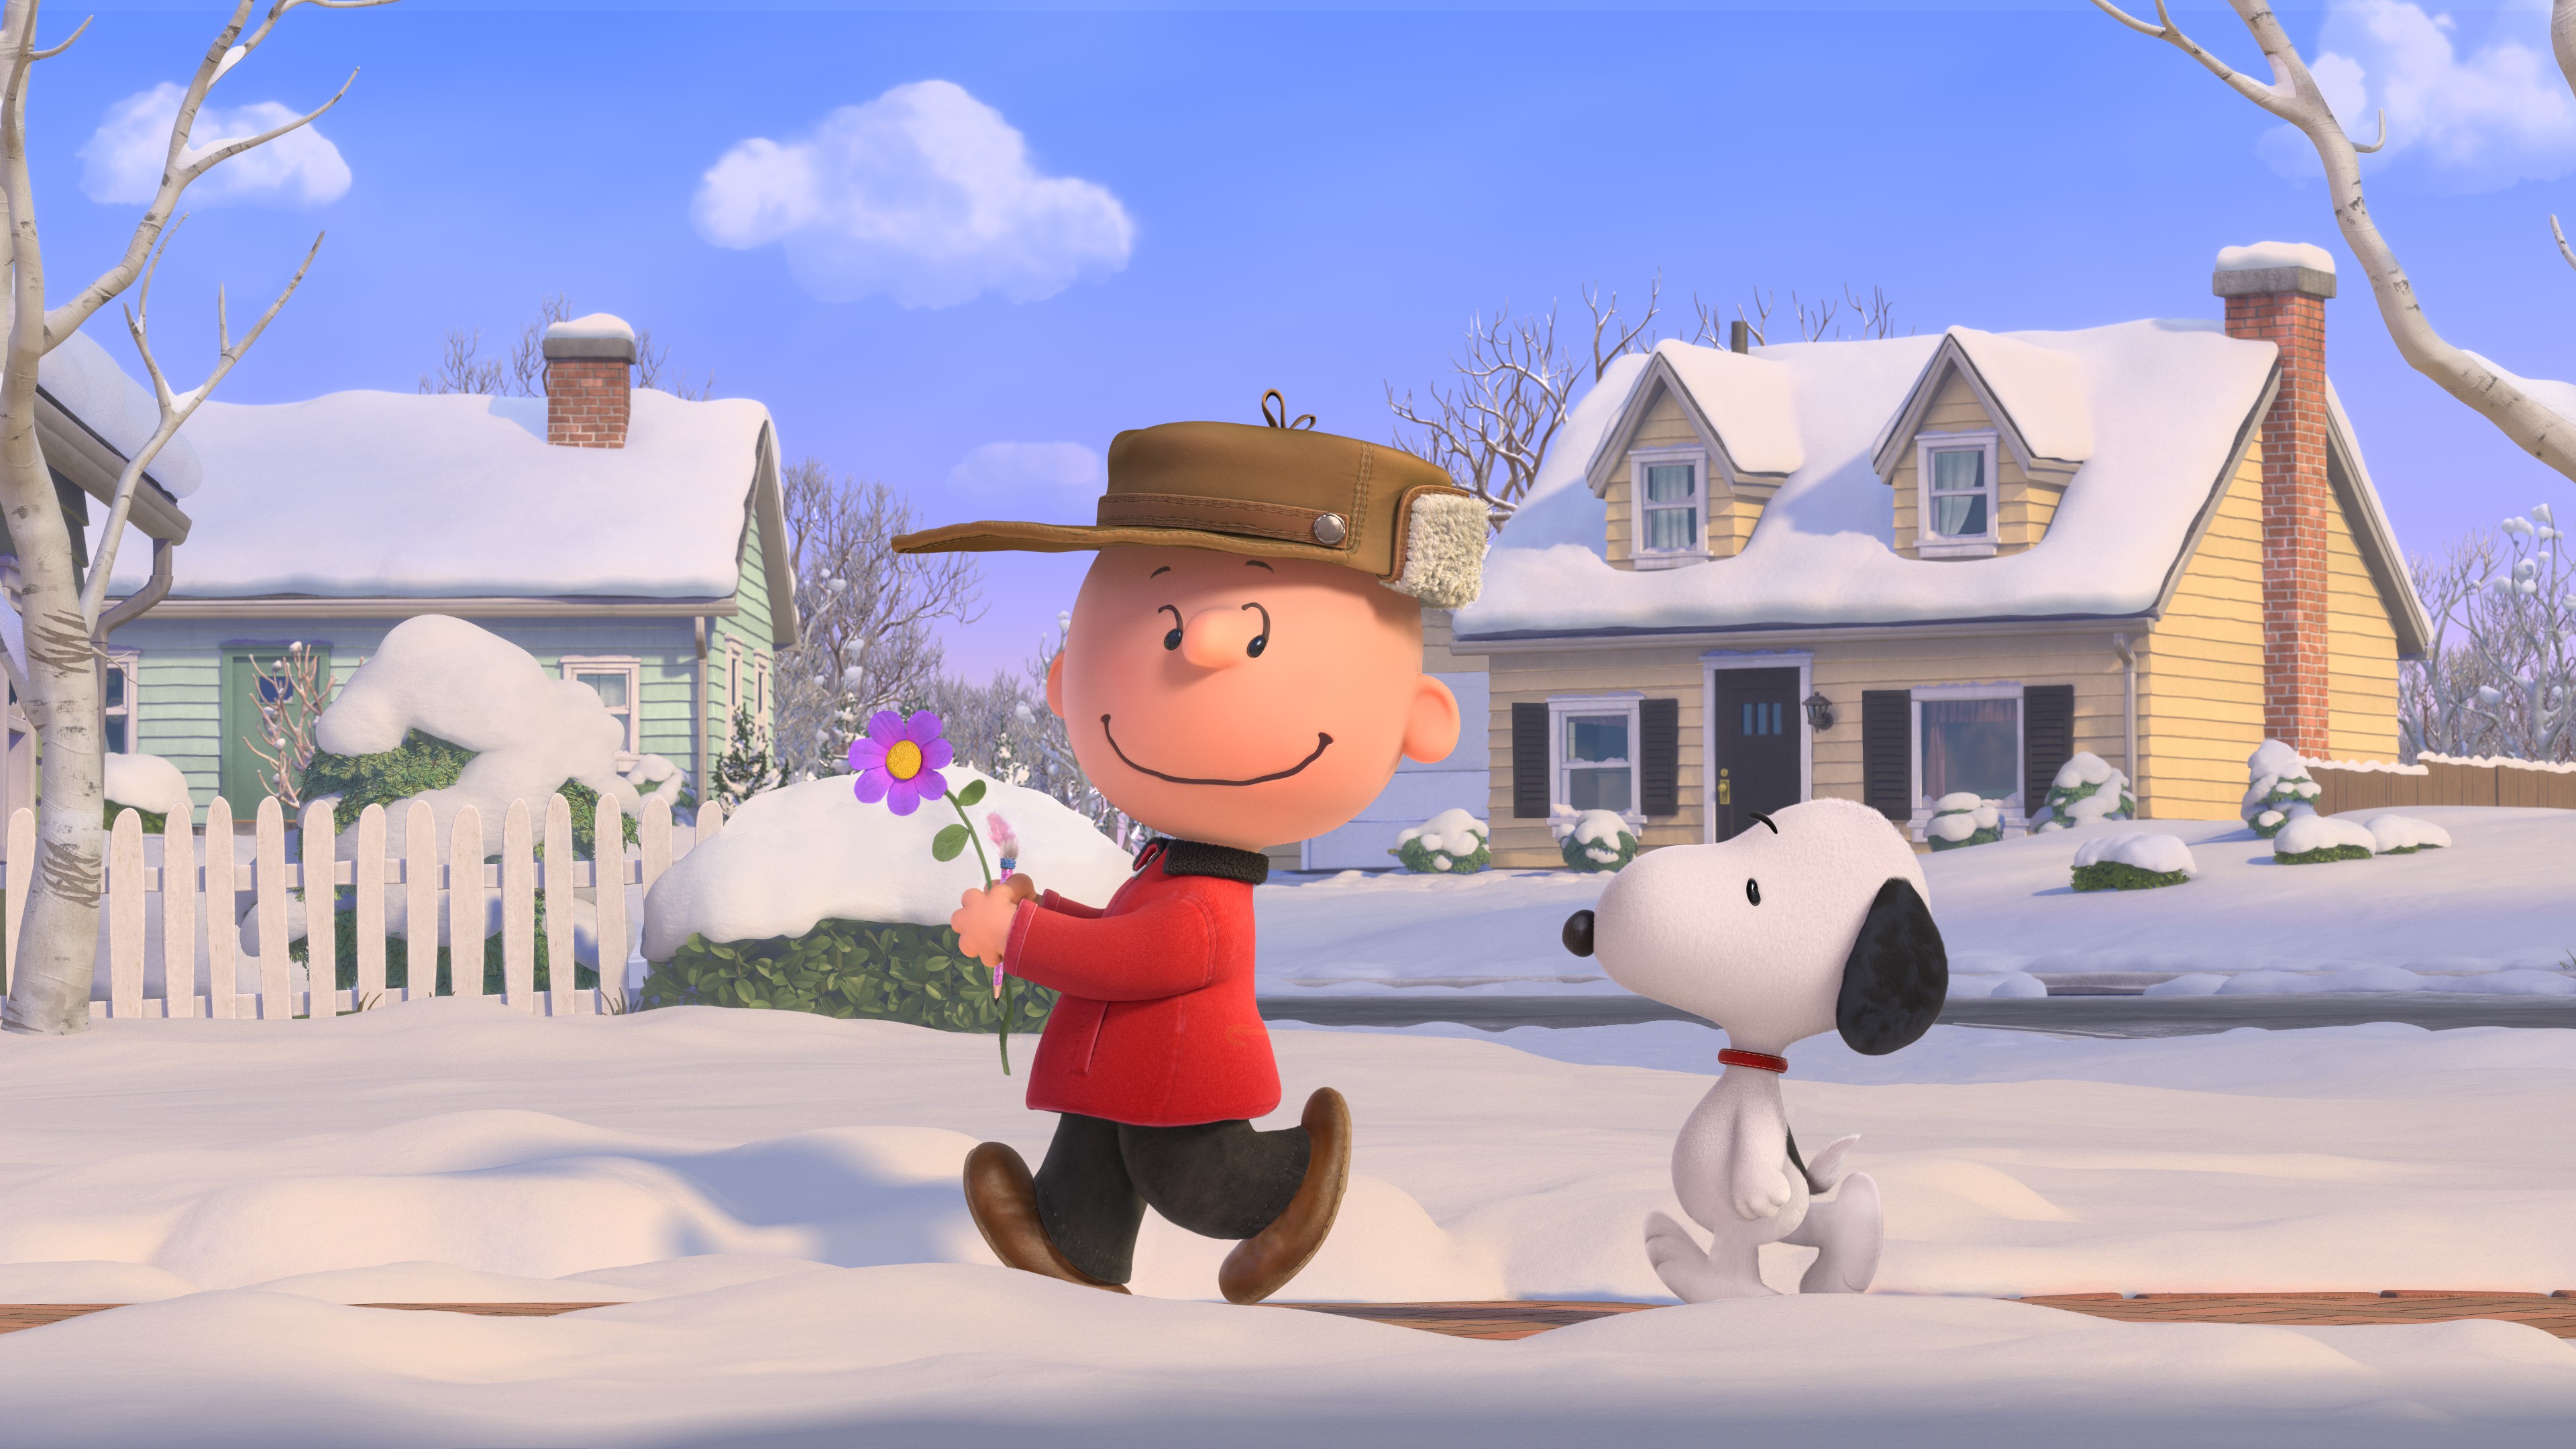 Wallpaper The Peanuts Movie, Snoopy, Charlie Brown, winter, Movies #7149